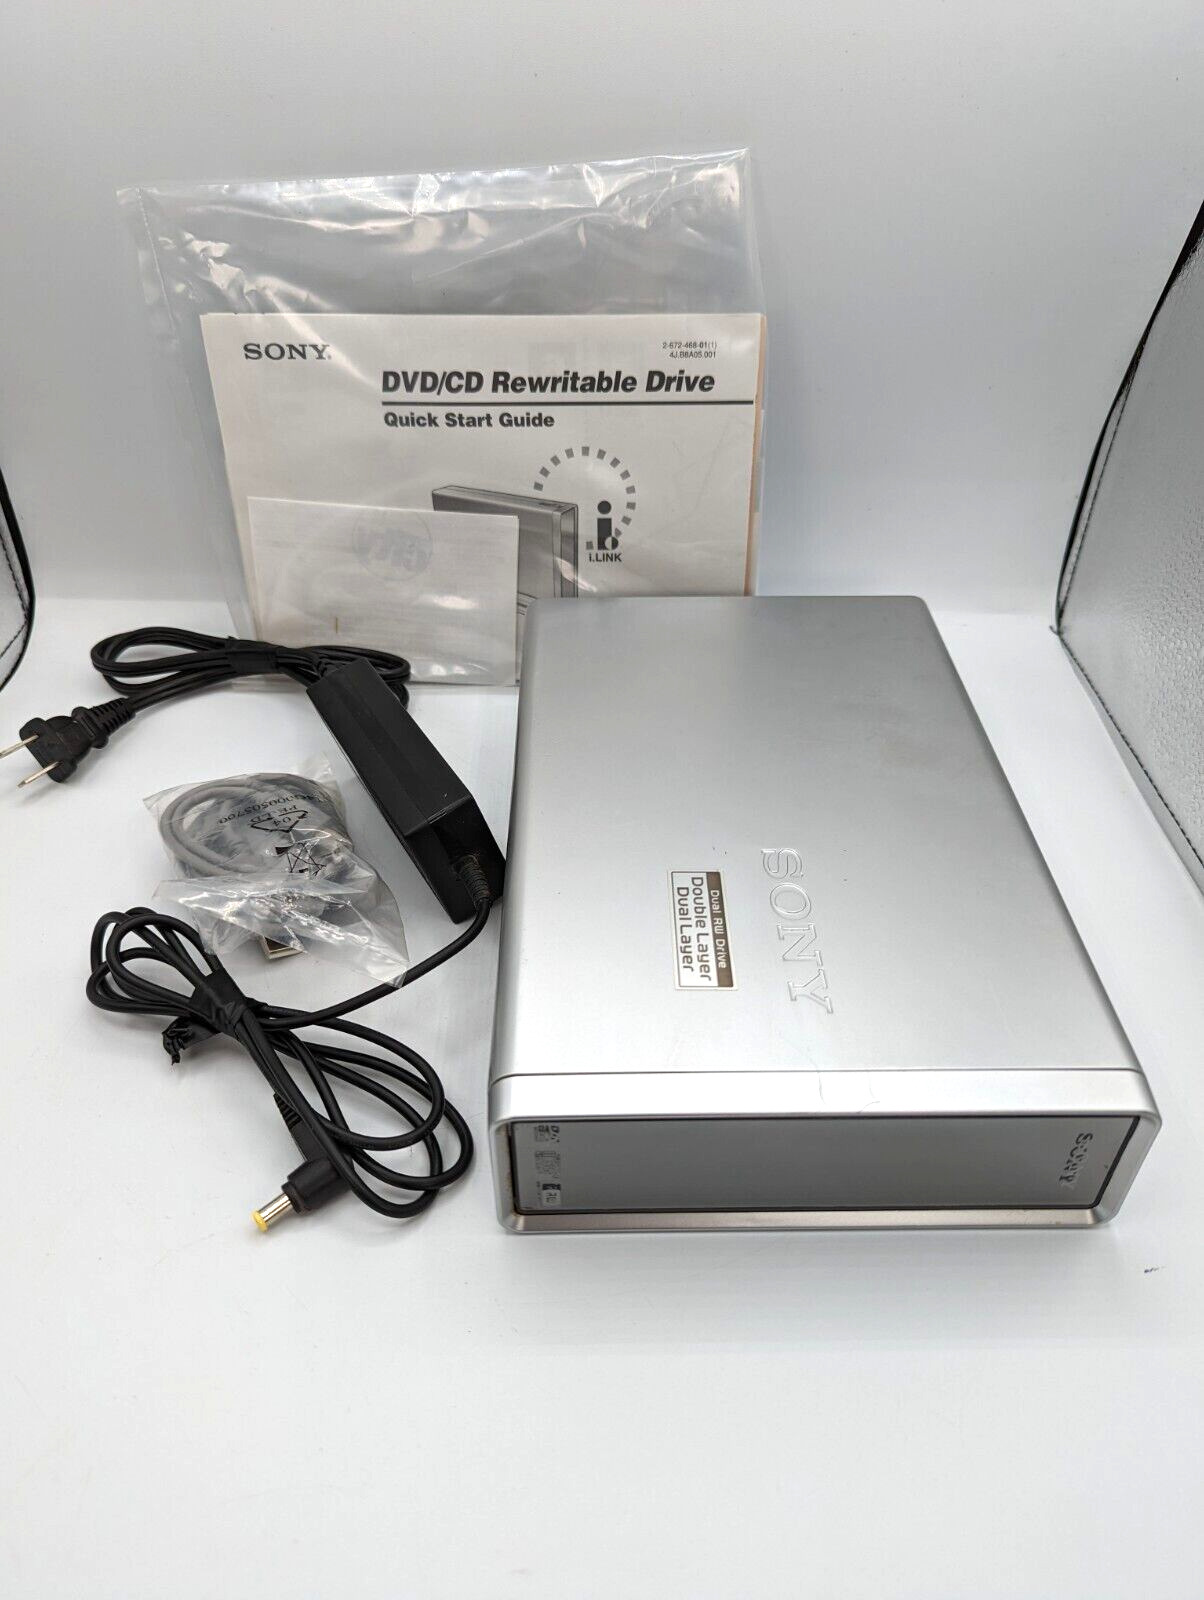 SONY DRX-830U, DVD/CD Rewritable Drive with stand cables and manual 